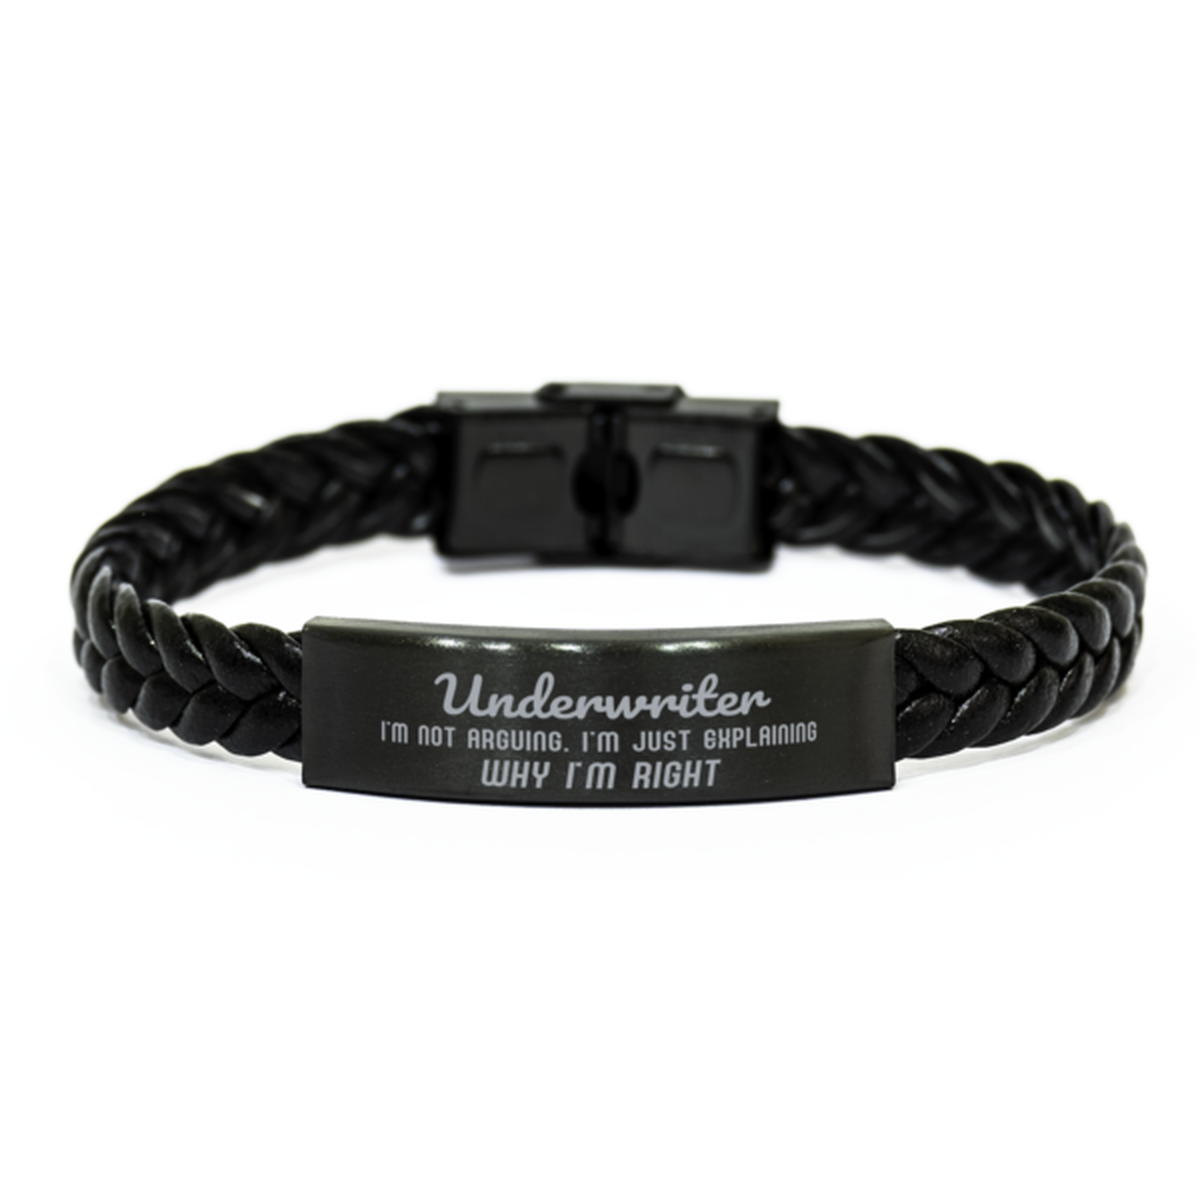 Underwriter I'm not Arguing. I'm Just Explaining Why I'm RIGHT Braided Leather Bracelet, Graduation Birthday Christmas Underwriter Gifts For Underwriter Funny Saying Quote Present for Men Women Coworker